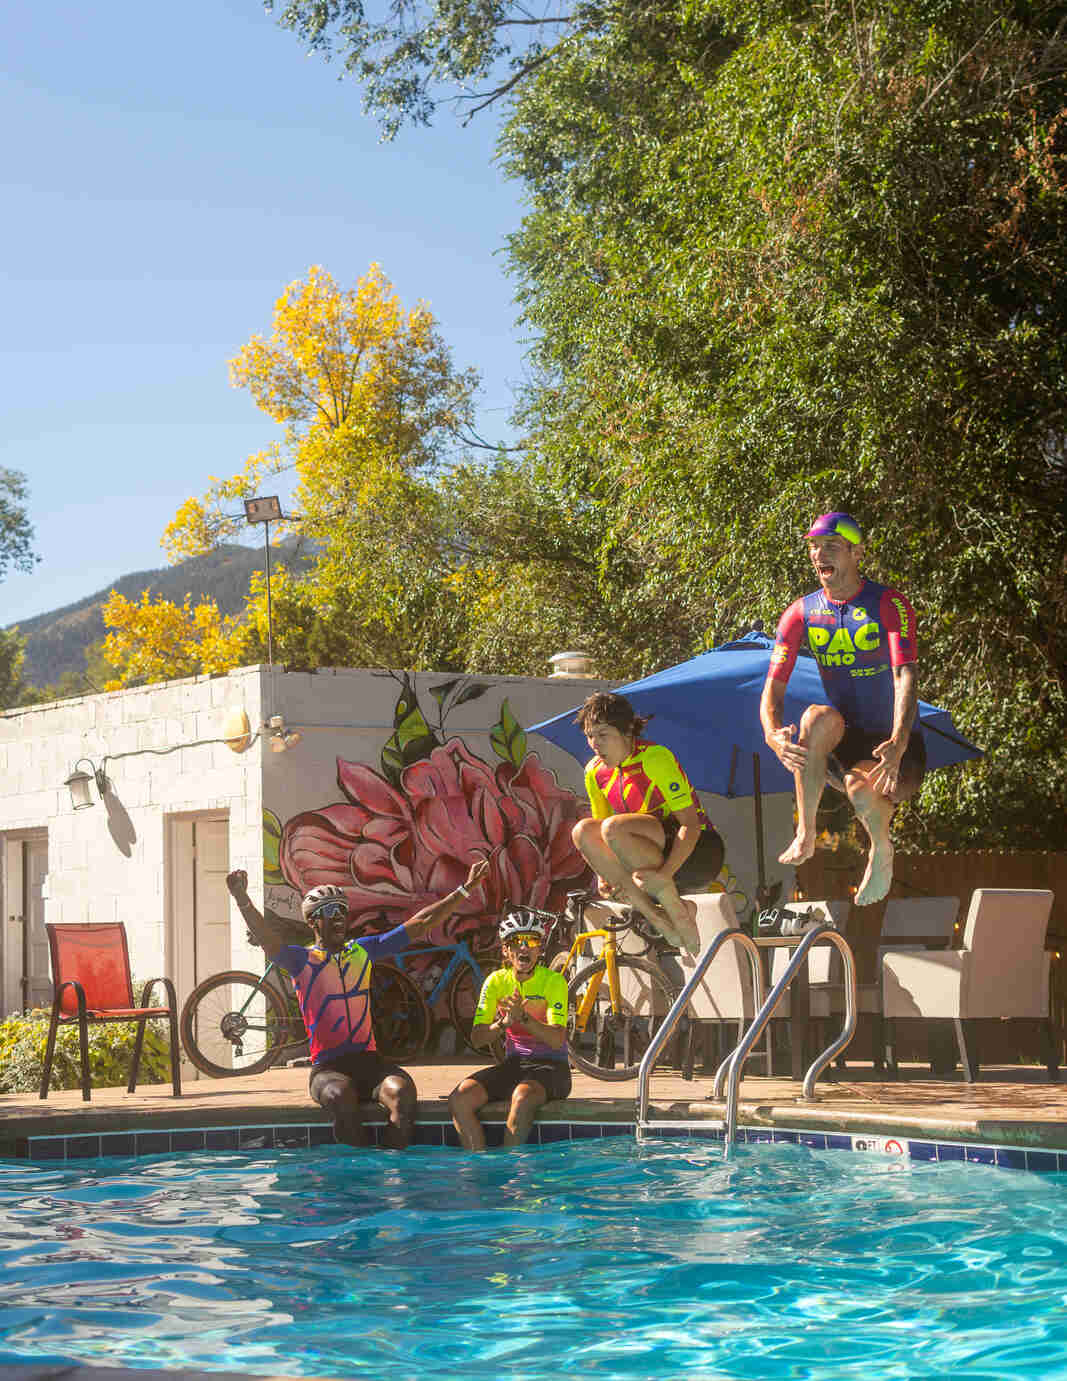 Cyclists Jumping in a Pool at Buffalo Bike Lodge